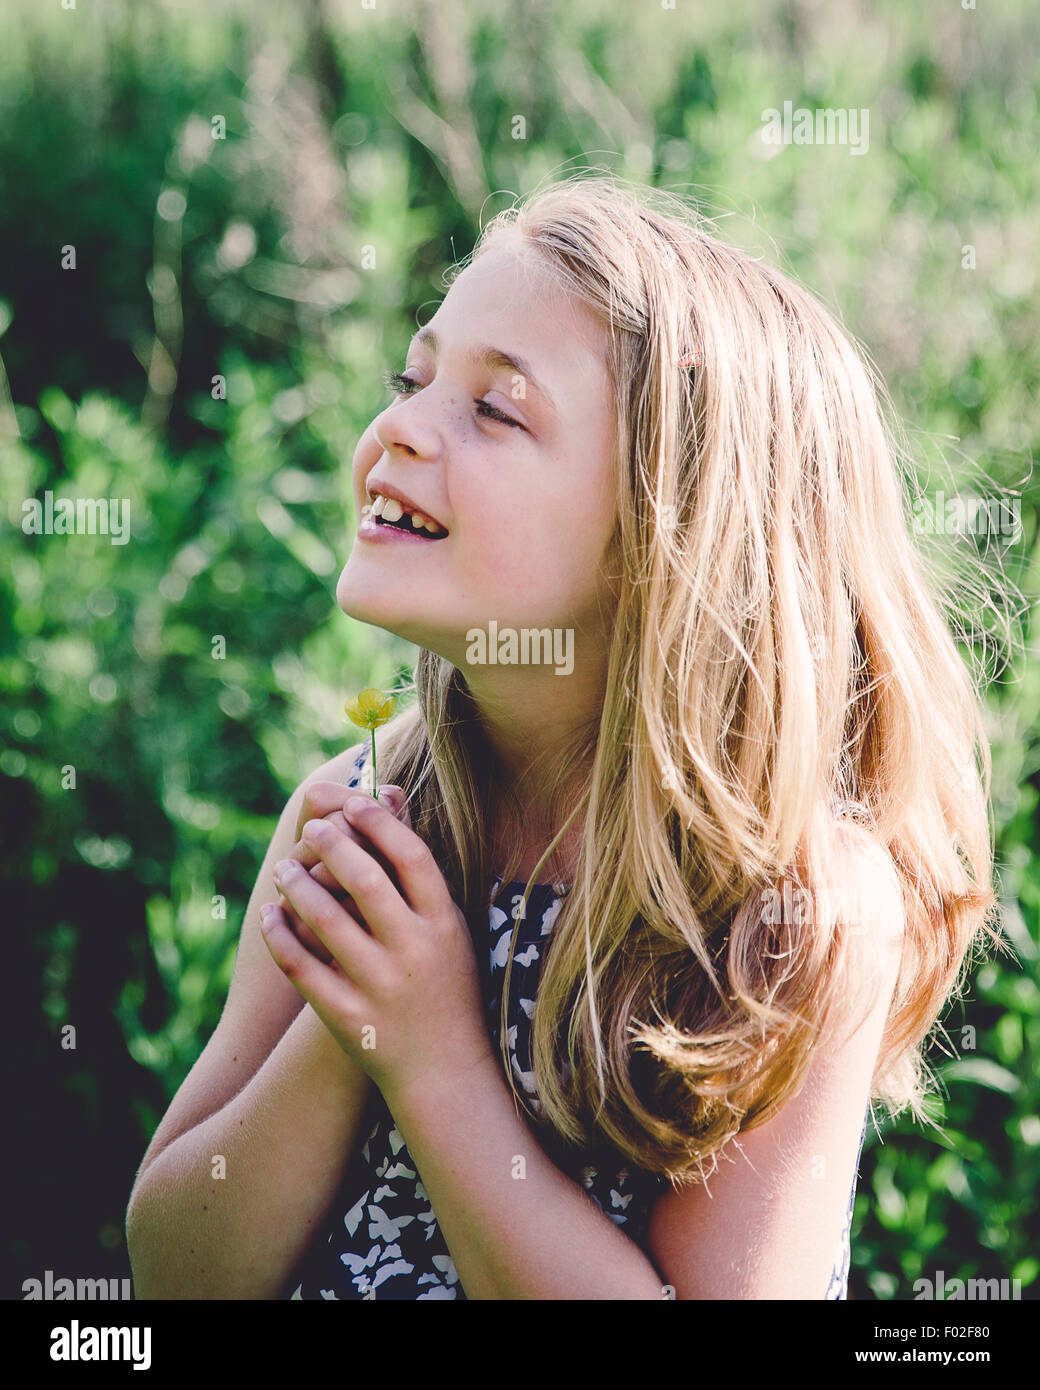 Portrait of a smiling girl holding a buttercup under her chin Stock Photo